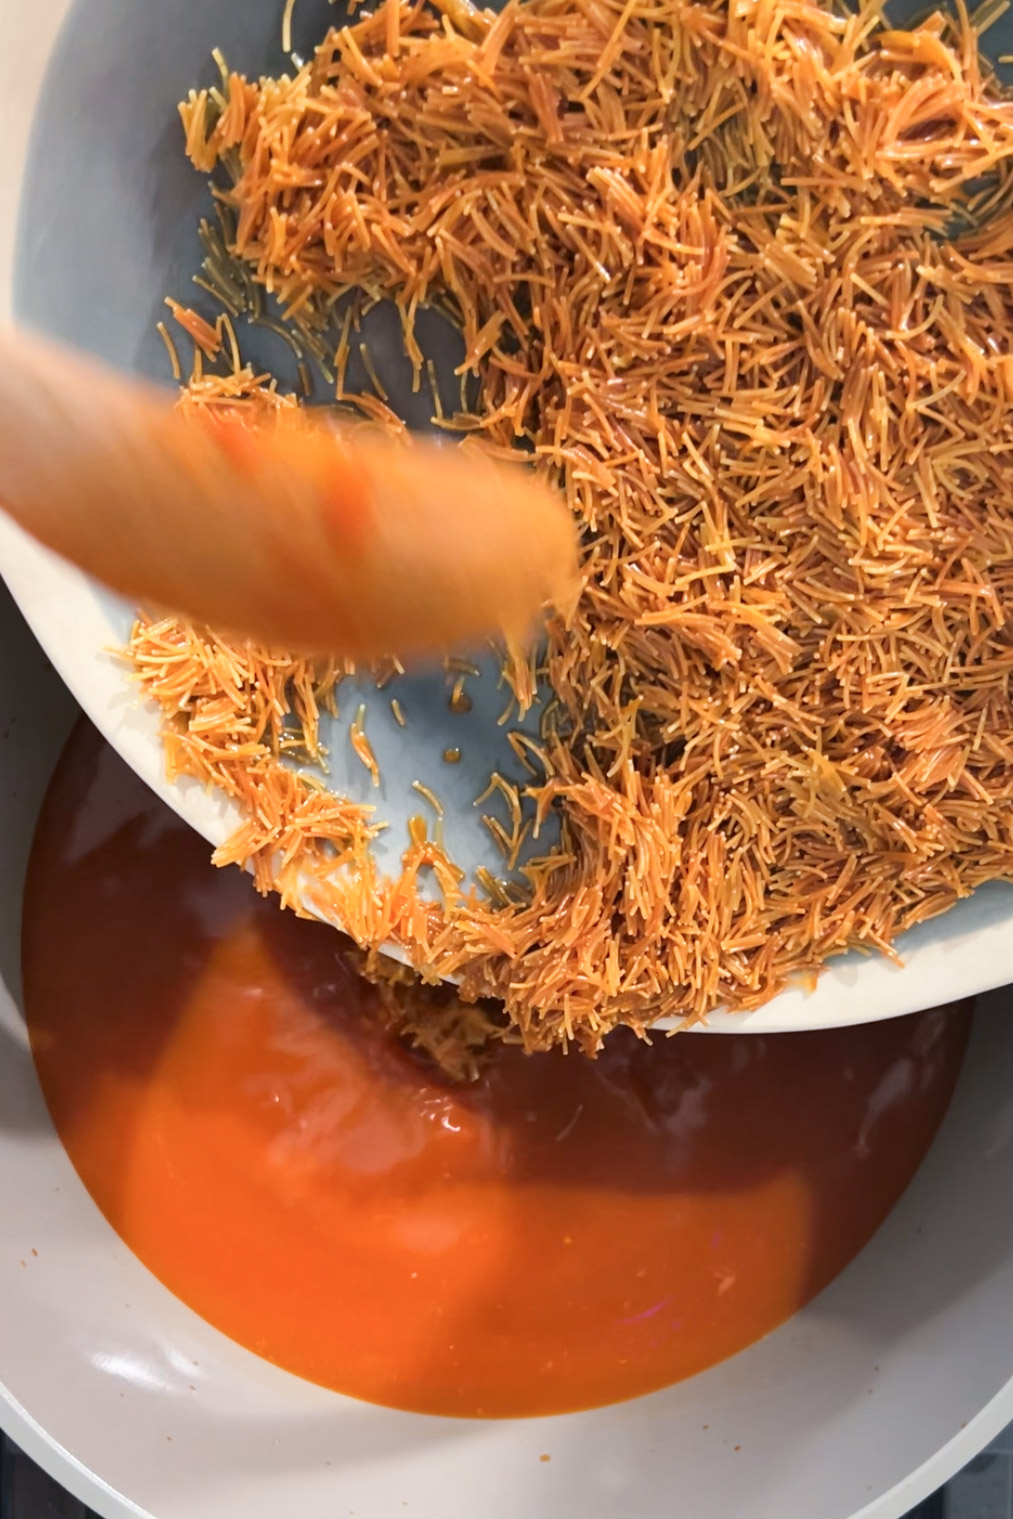 Shredded carrots in a bowl with a spoon.